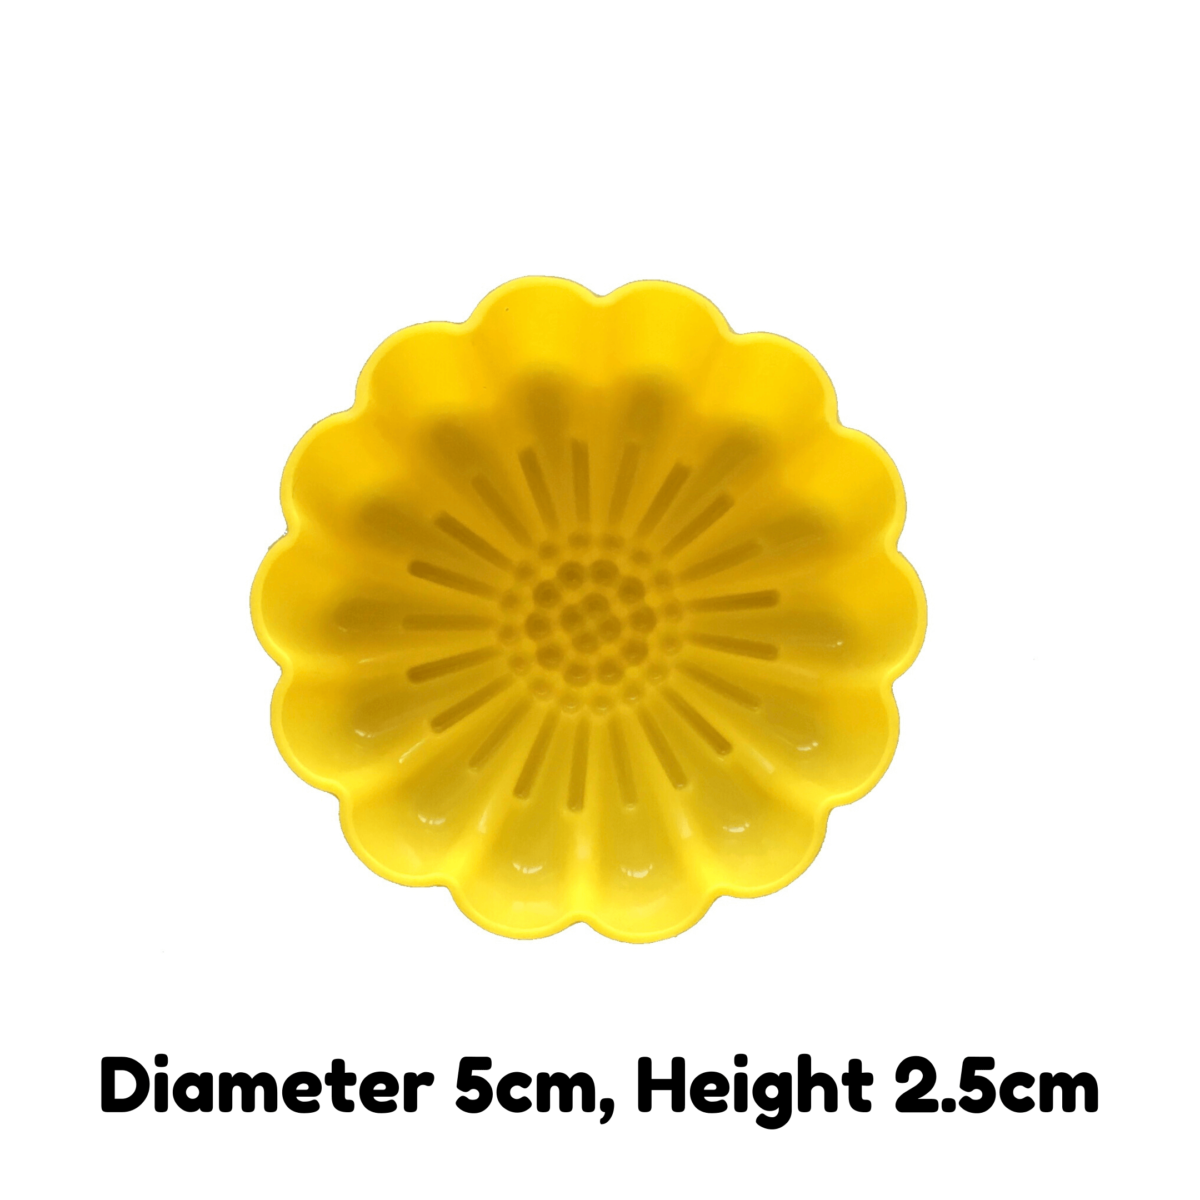 written dimensions of 5cm yellow chrysanthemum flower single cavity silicone mould